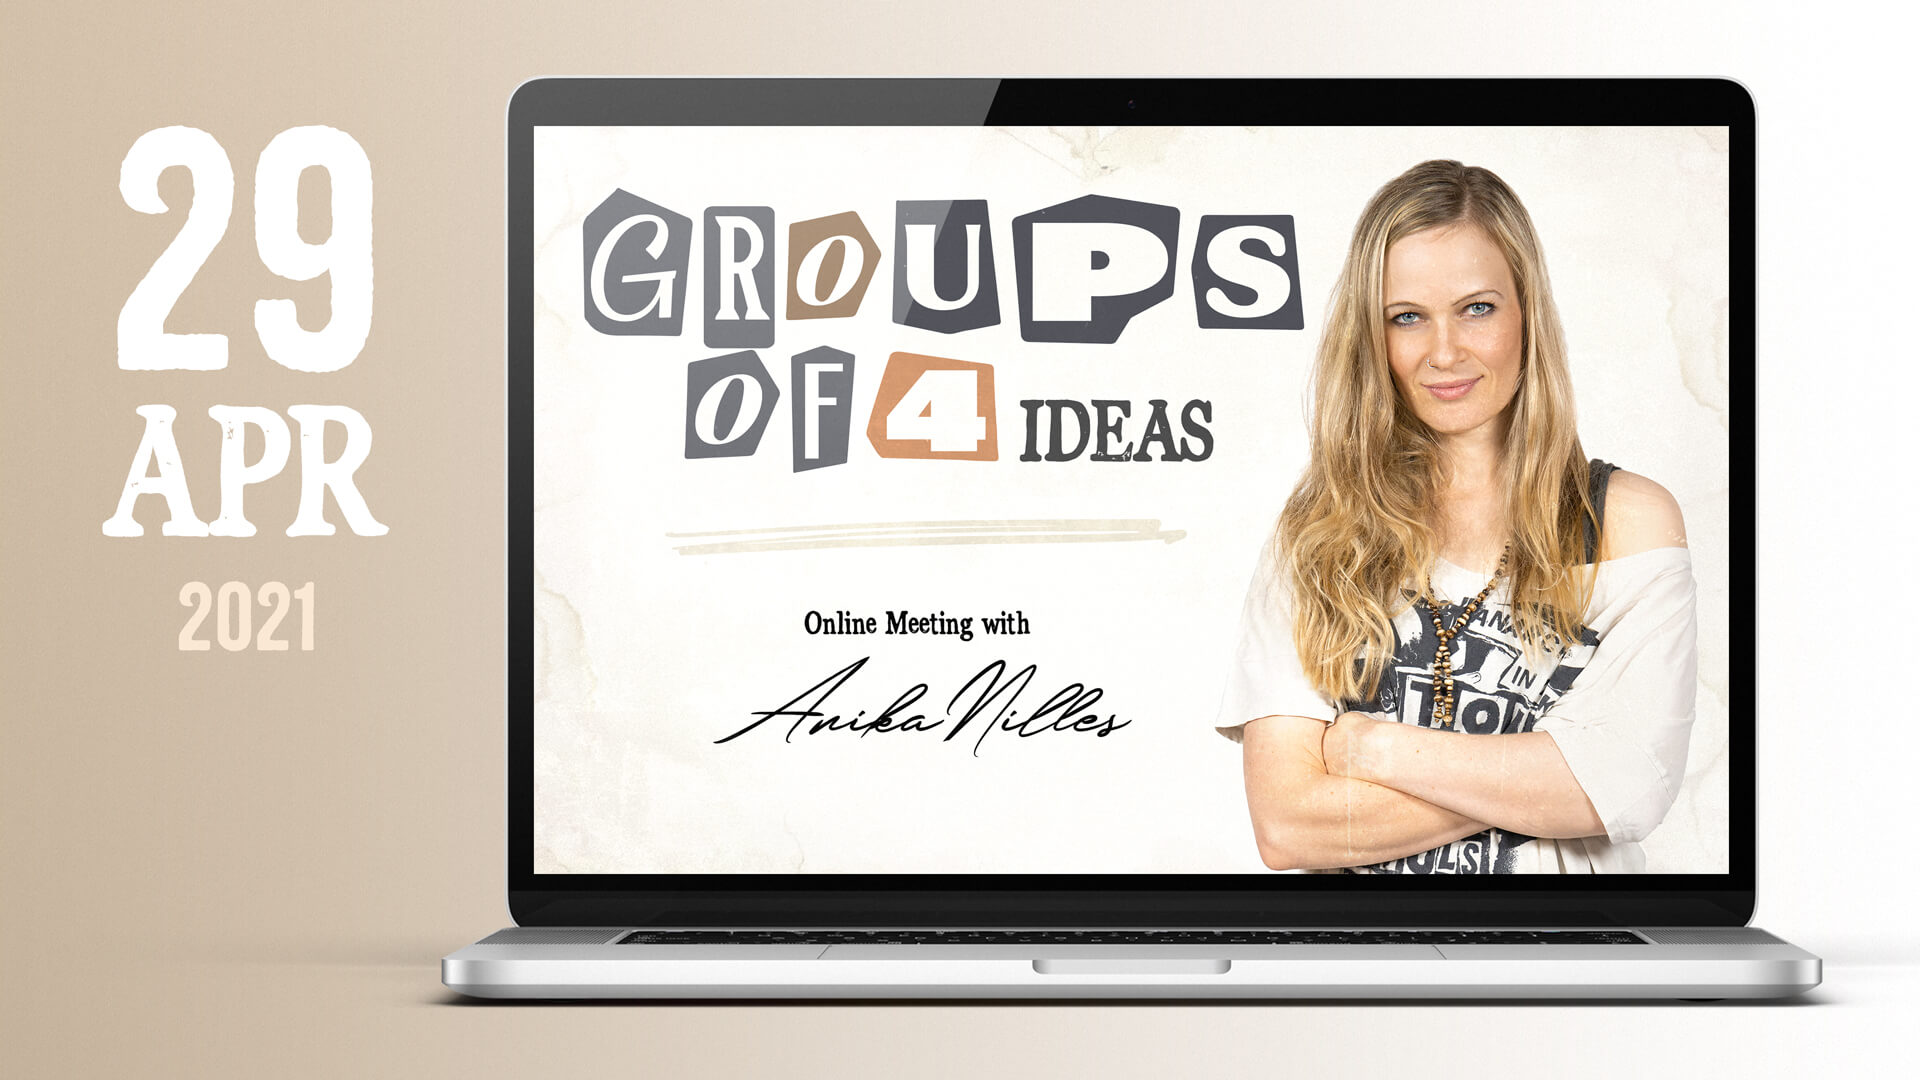 online meeting 29 04 2021 groups of 4 ideas with anika nilles thumbnail